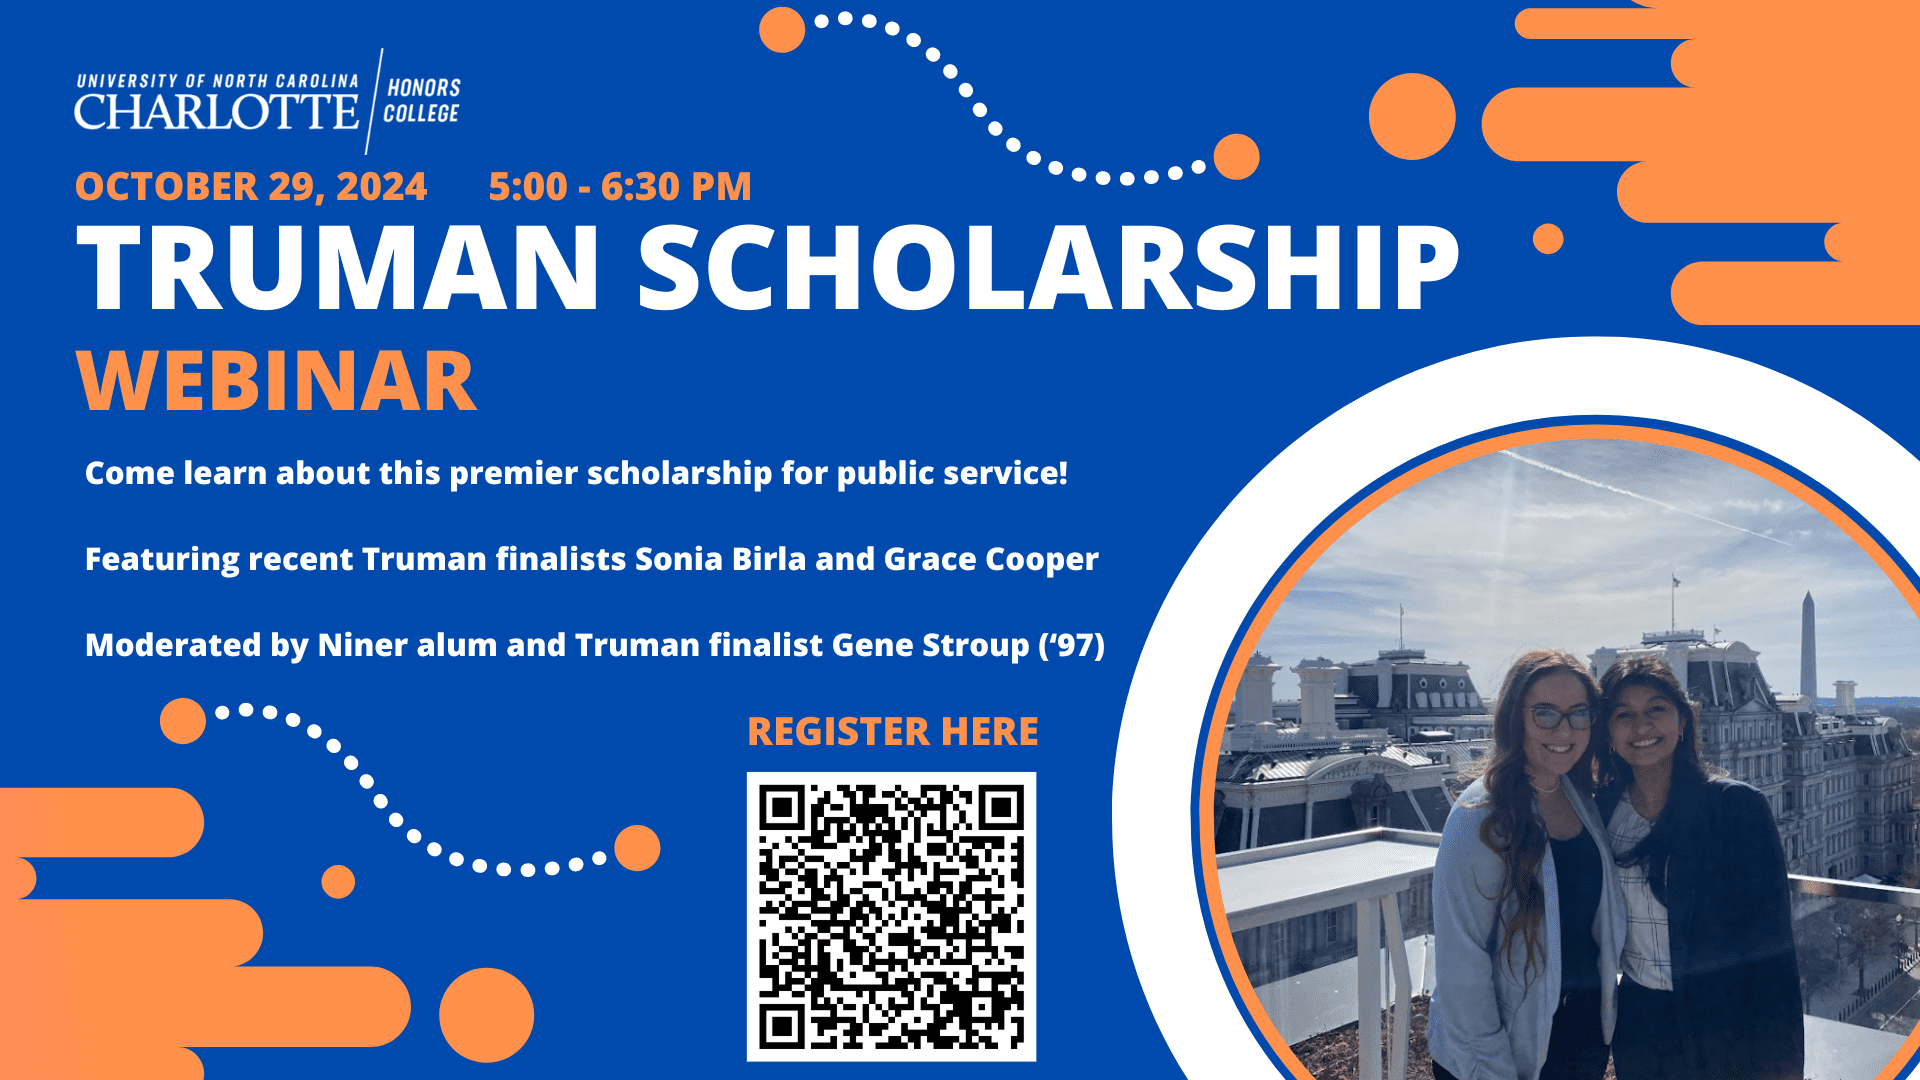 October 29, 2024. 5:00-6:30pm. Truman Scholarship Webinar. 
Come learn about this premier scholarship for public service! Featuring recent Truman finalists Sonia Birla and Grace Cooper. Moderated by Niner alum and Truman finalist Gene Stroup ('97). 

Register Here (QR Code)